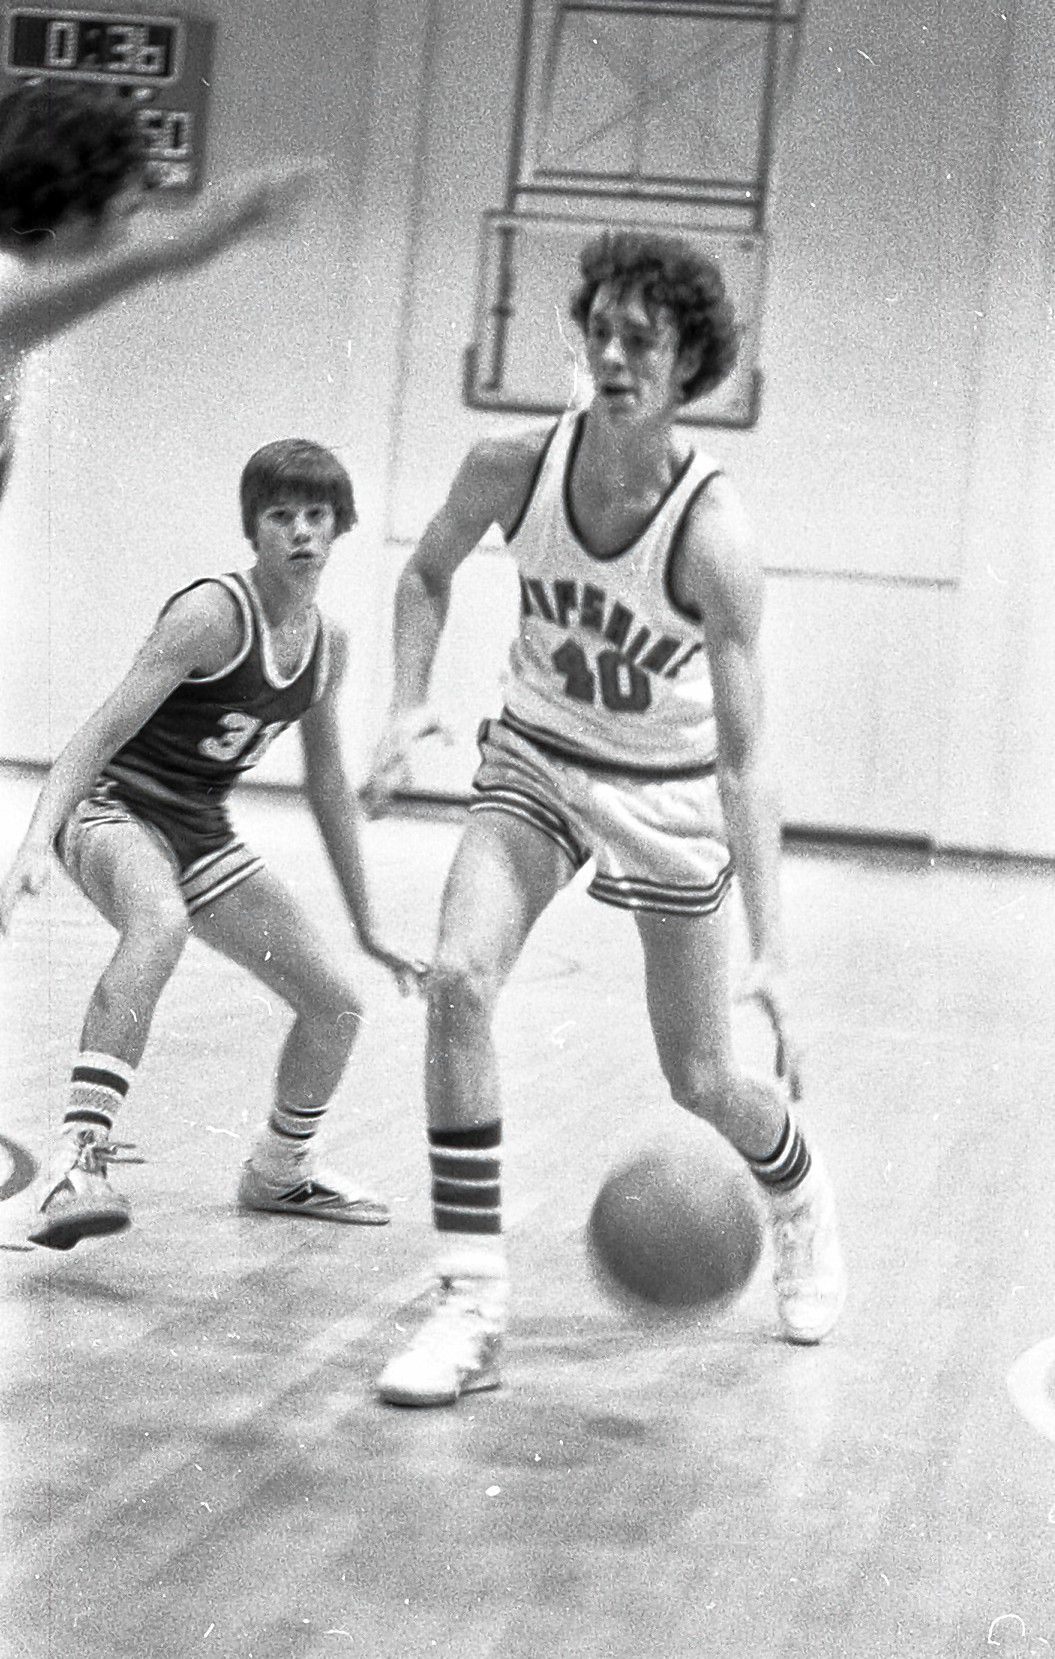 Northampton Mayor David Narkewicz, left, was a point guard for the